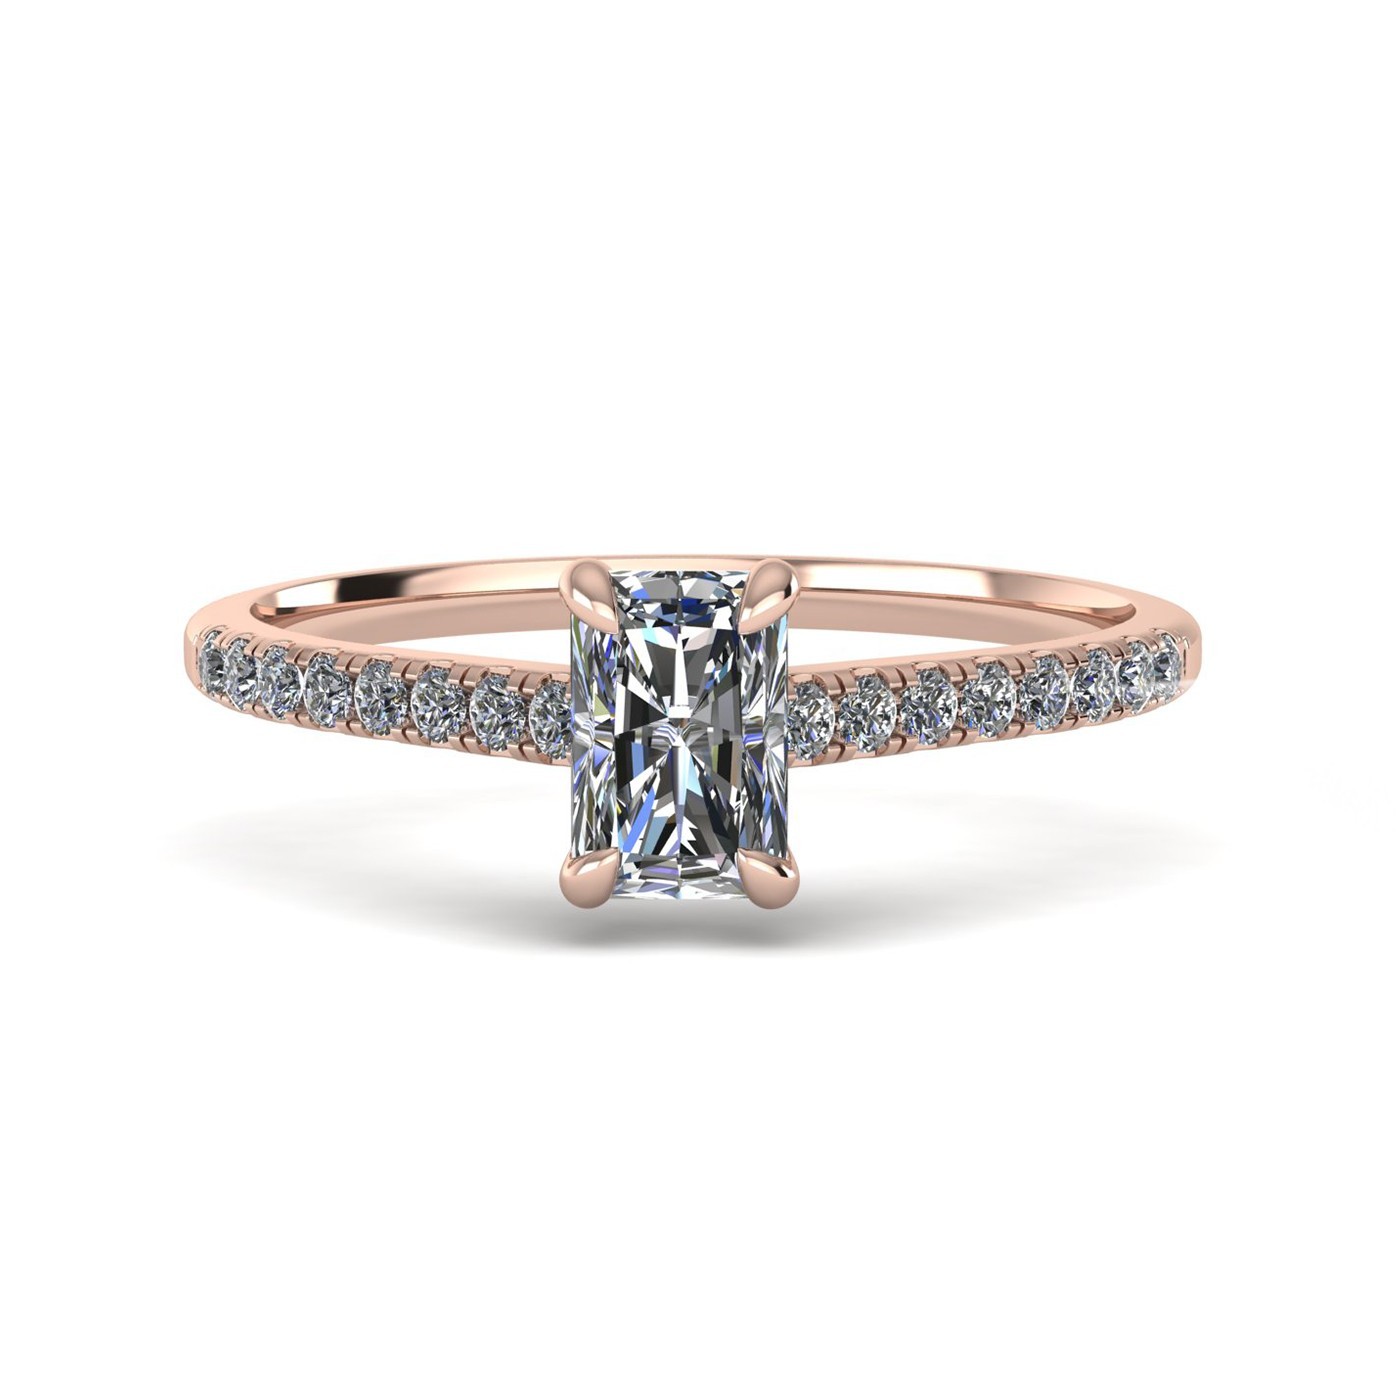 18k rose gold  0,30 ct 4 prongs radiant cut diamond engagement ring with whisper thin pavÉ set band Photos & images